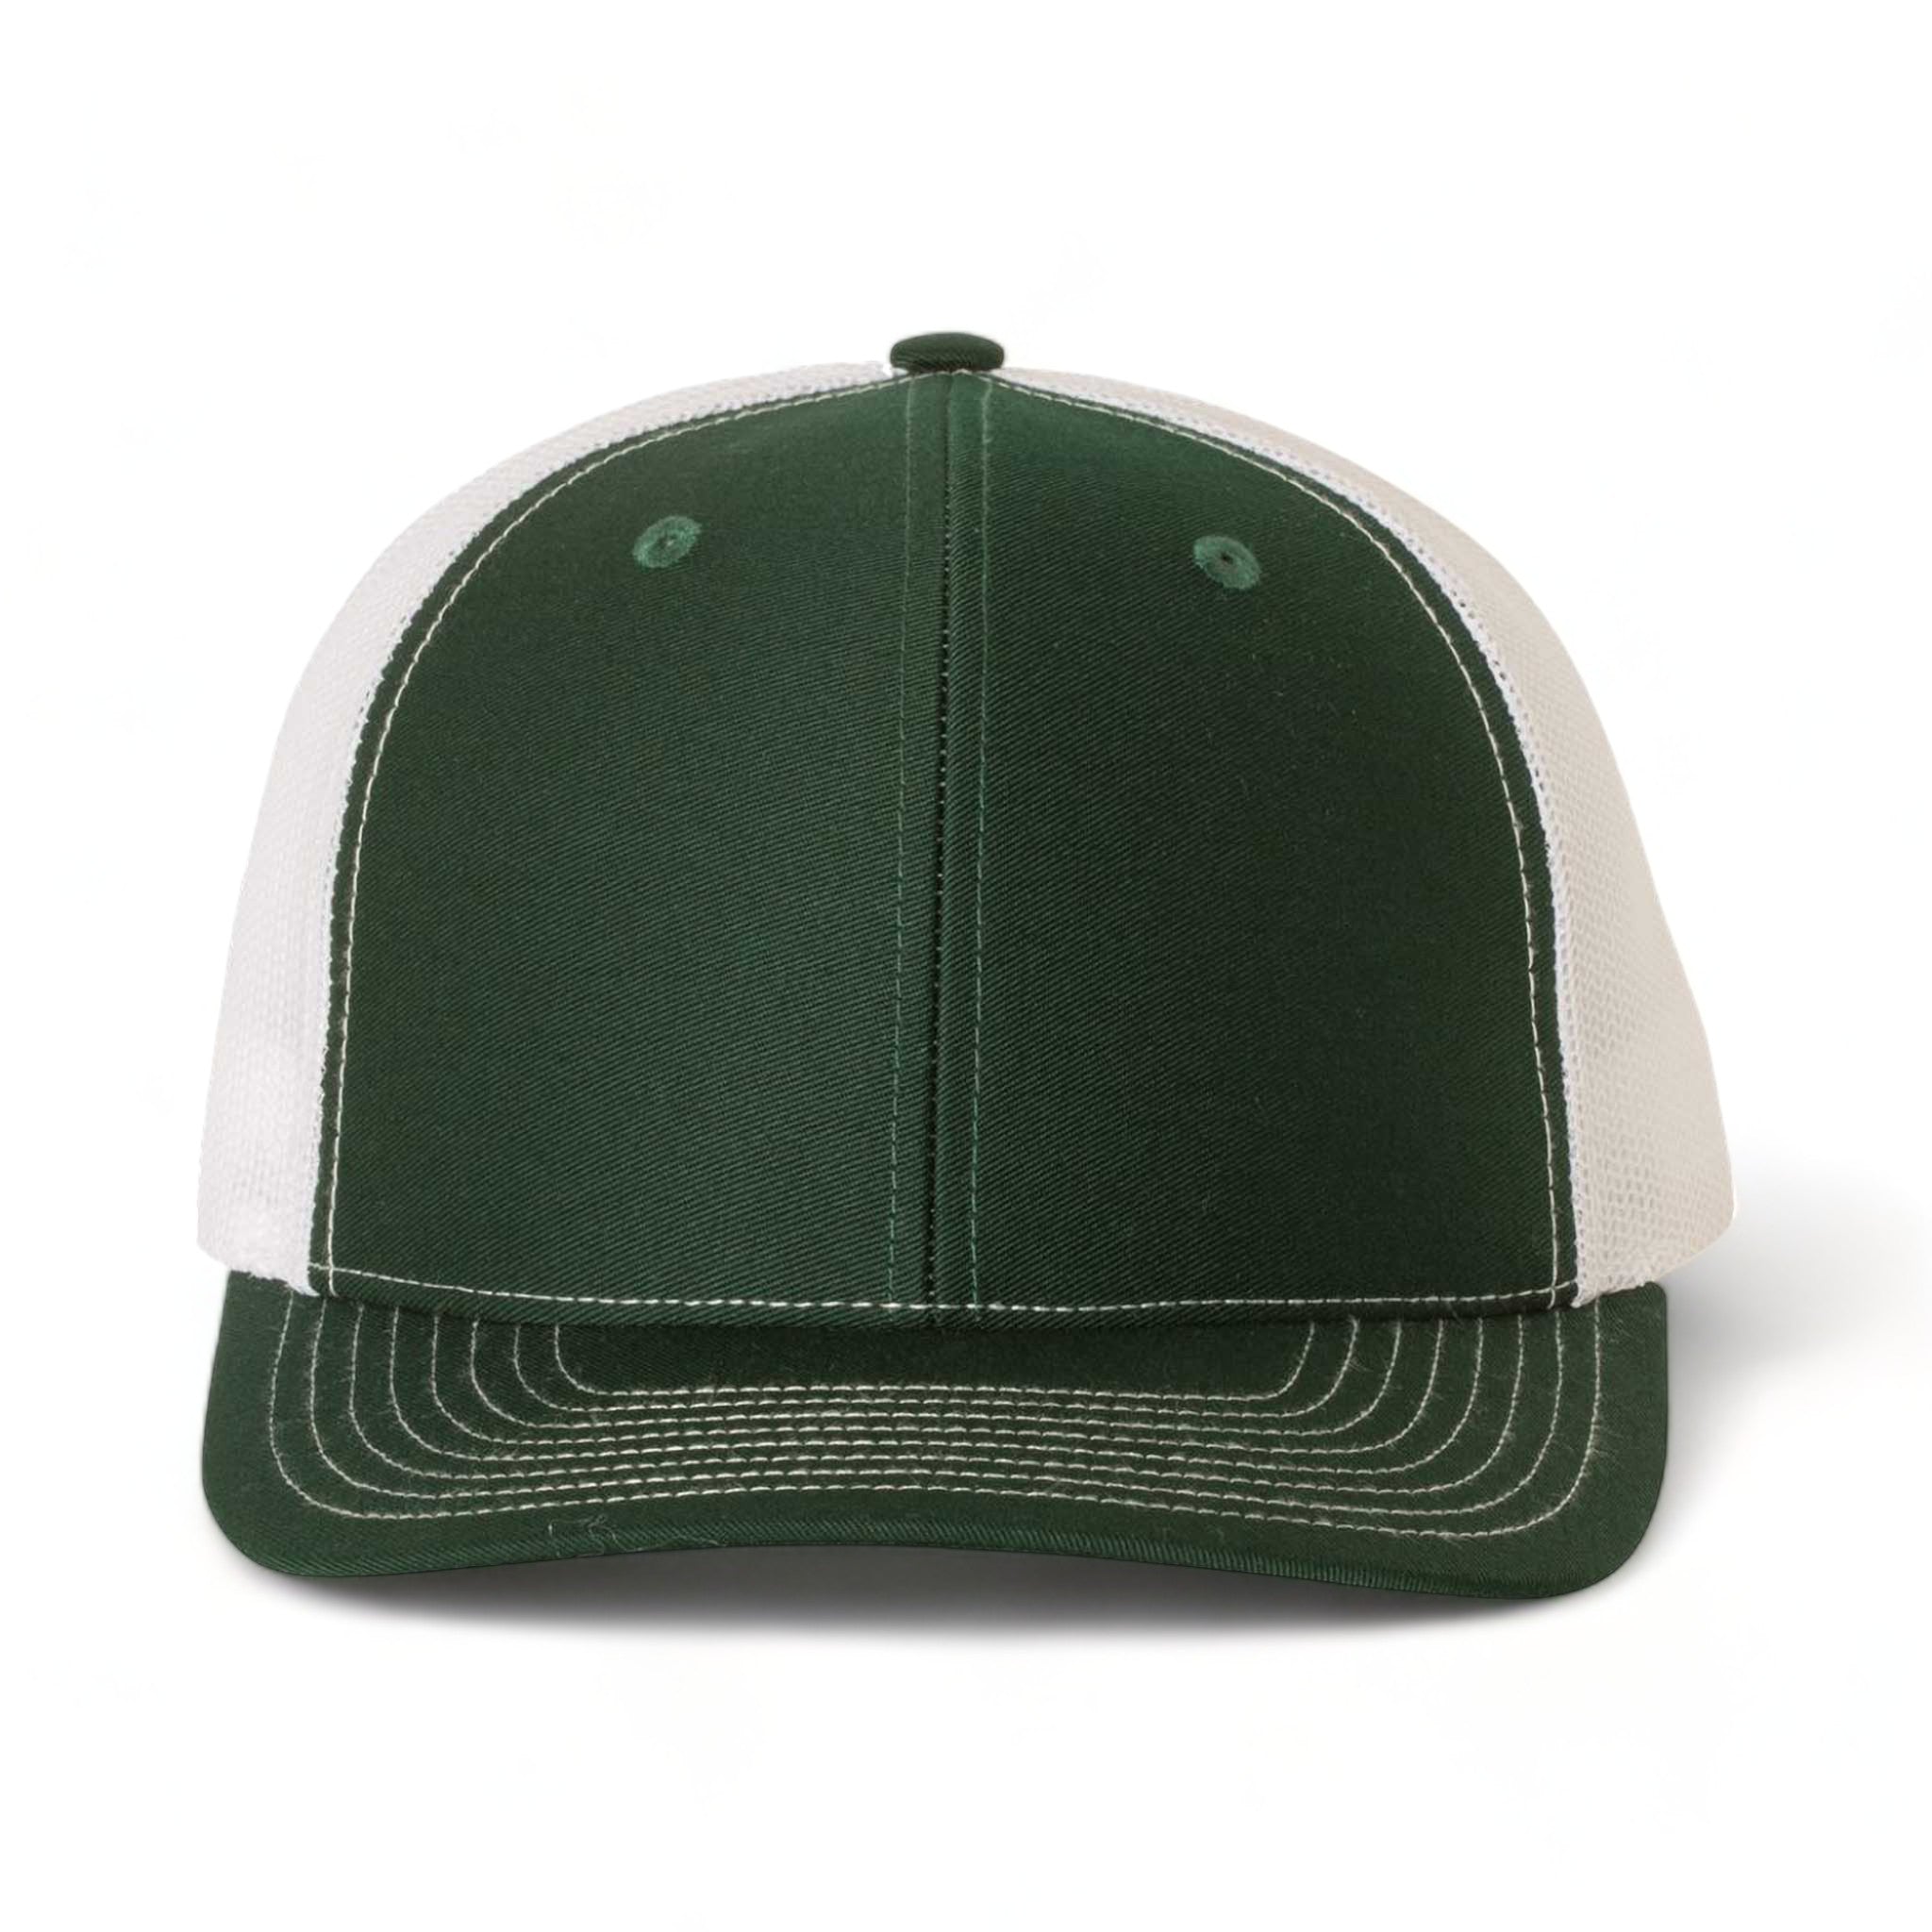 Front view of Richardson 112 custom hat in dark green and white